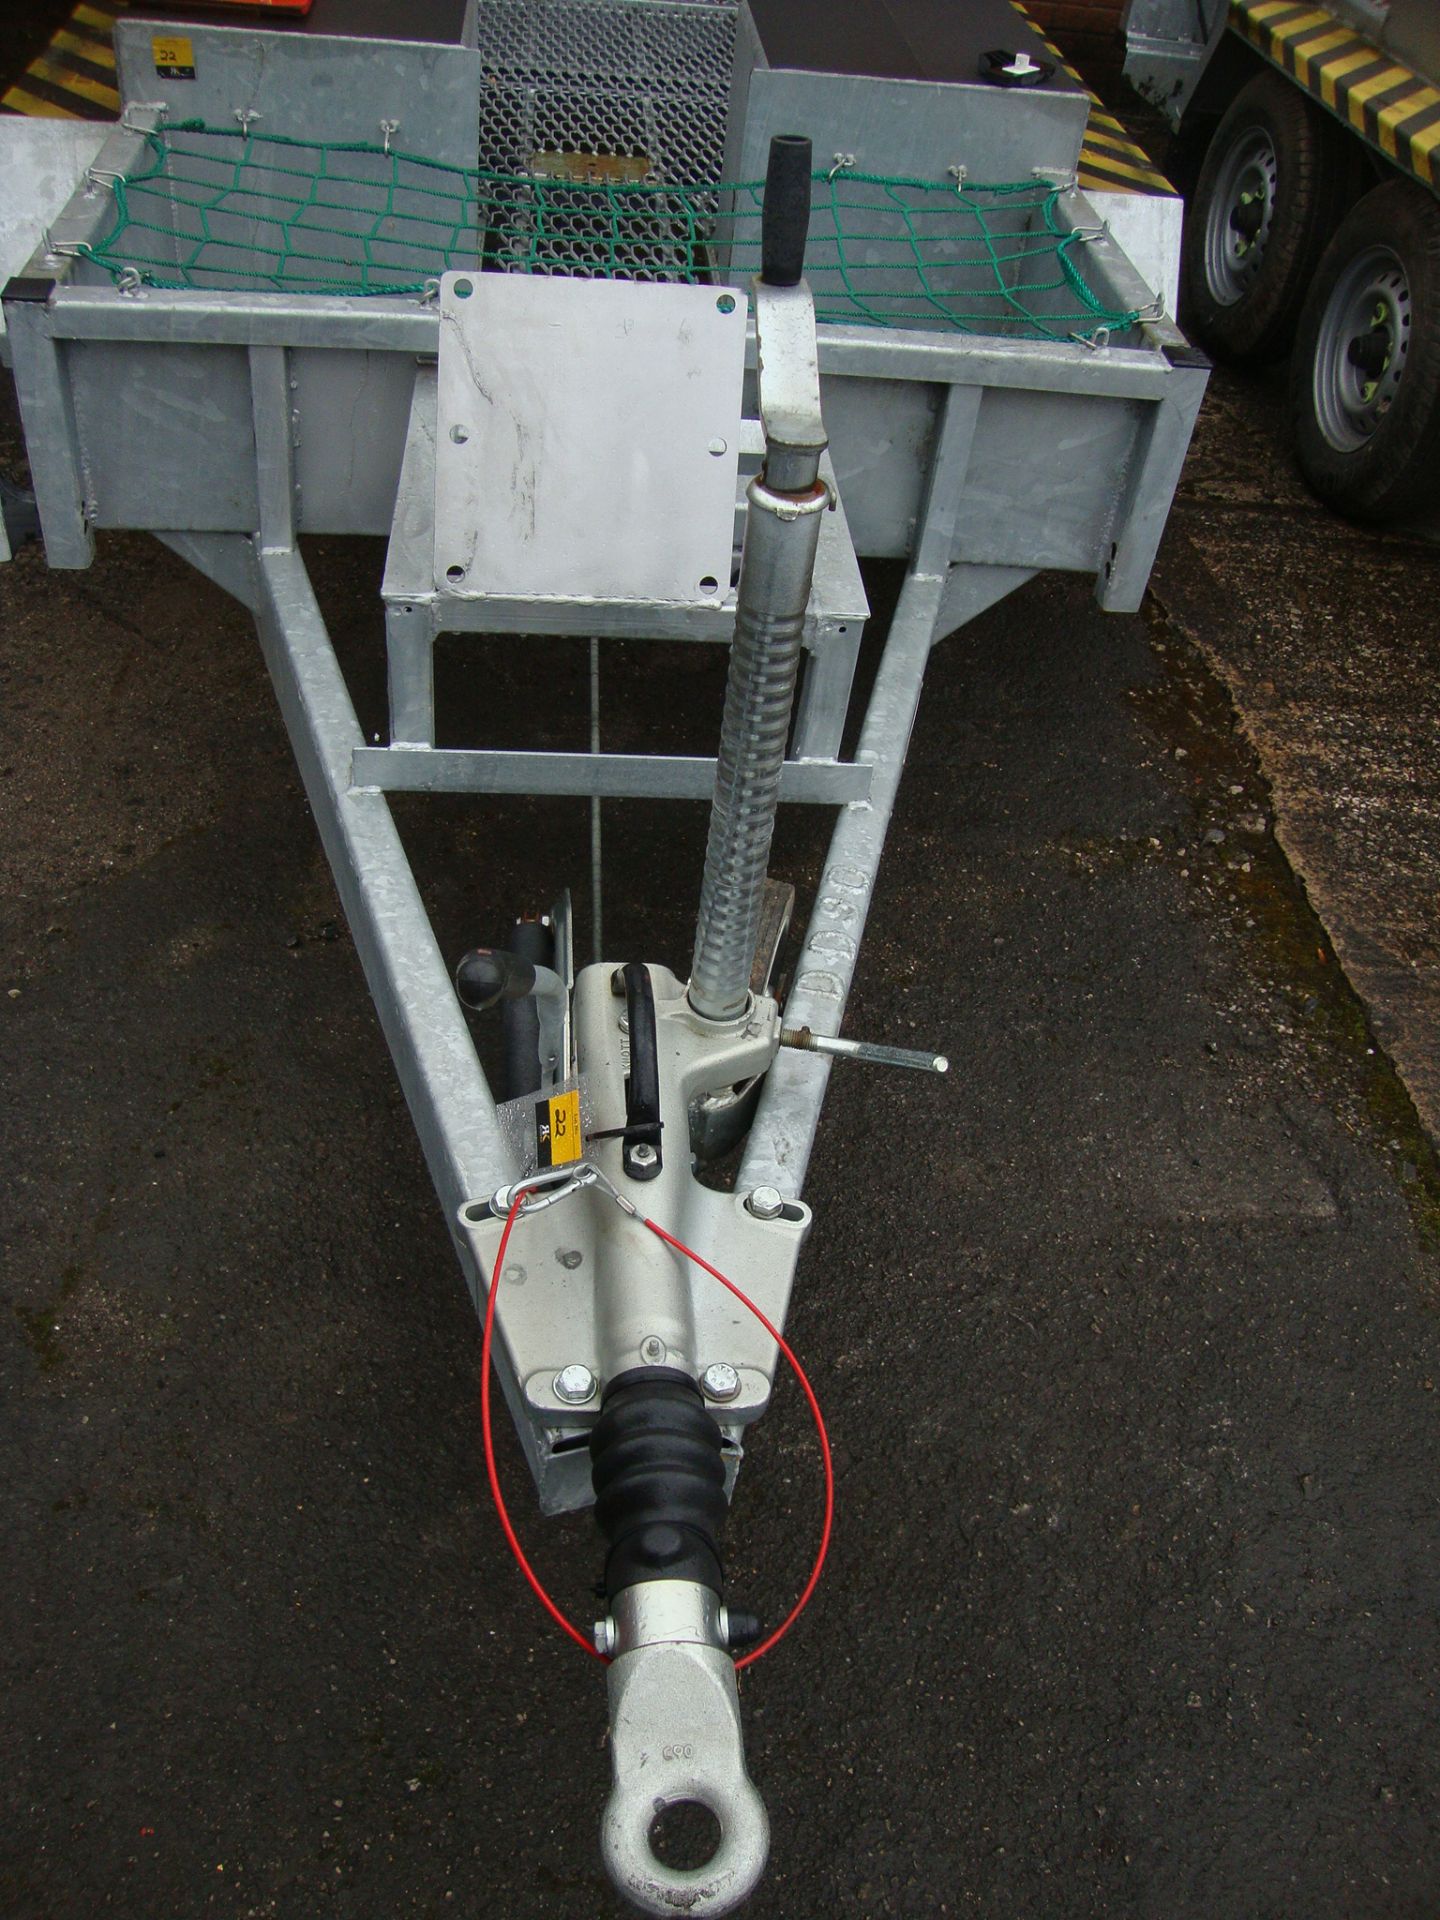 Mini digger/excavator specialist trailer incorporating large drive-on ramp at rear, shrouds for - Image 3 of 7